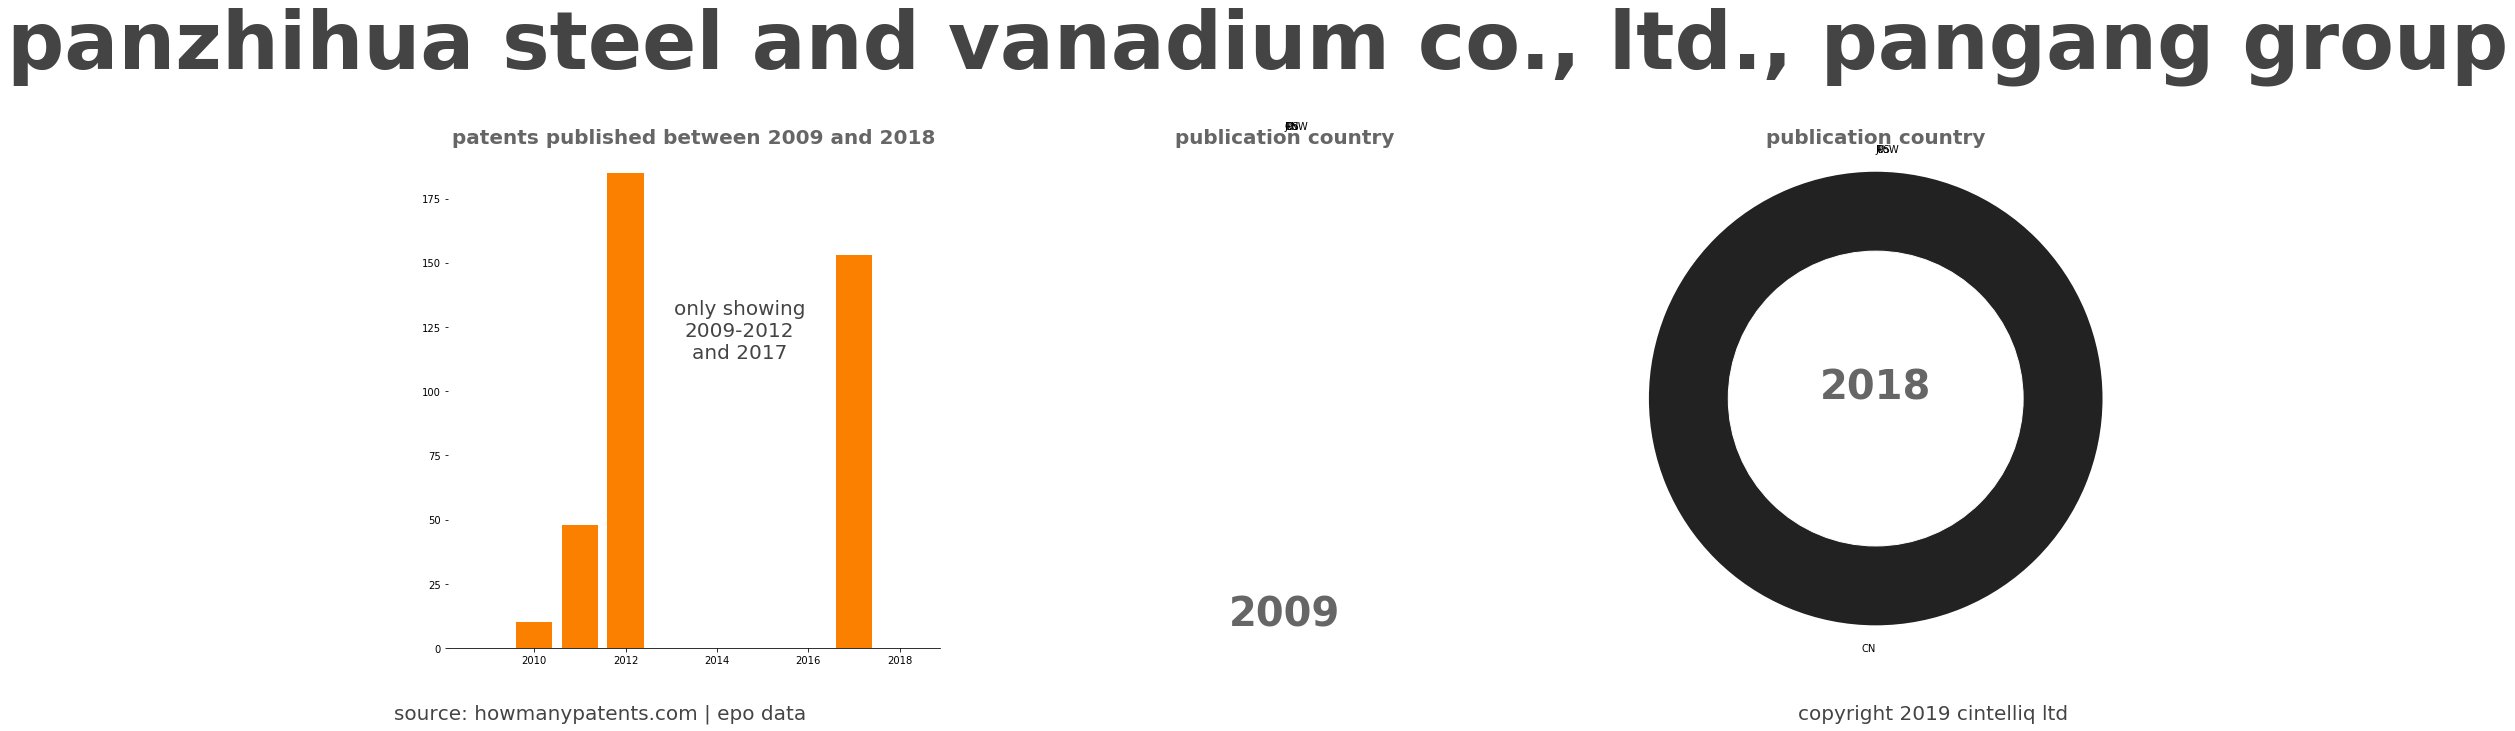 summary of patents for Panzhihua Steel And Vanadium Co., Ltd., Pangang Group